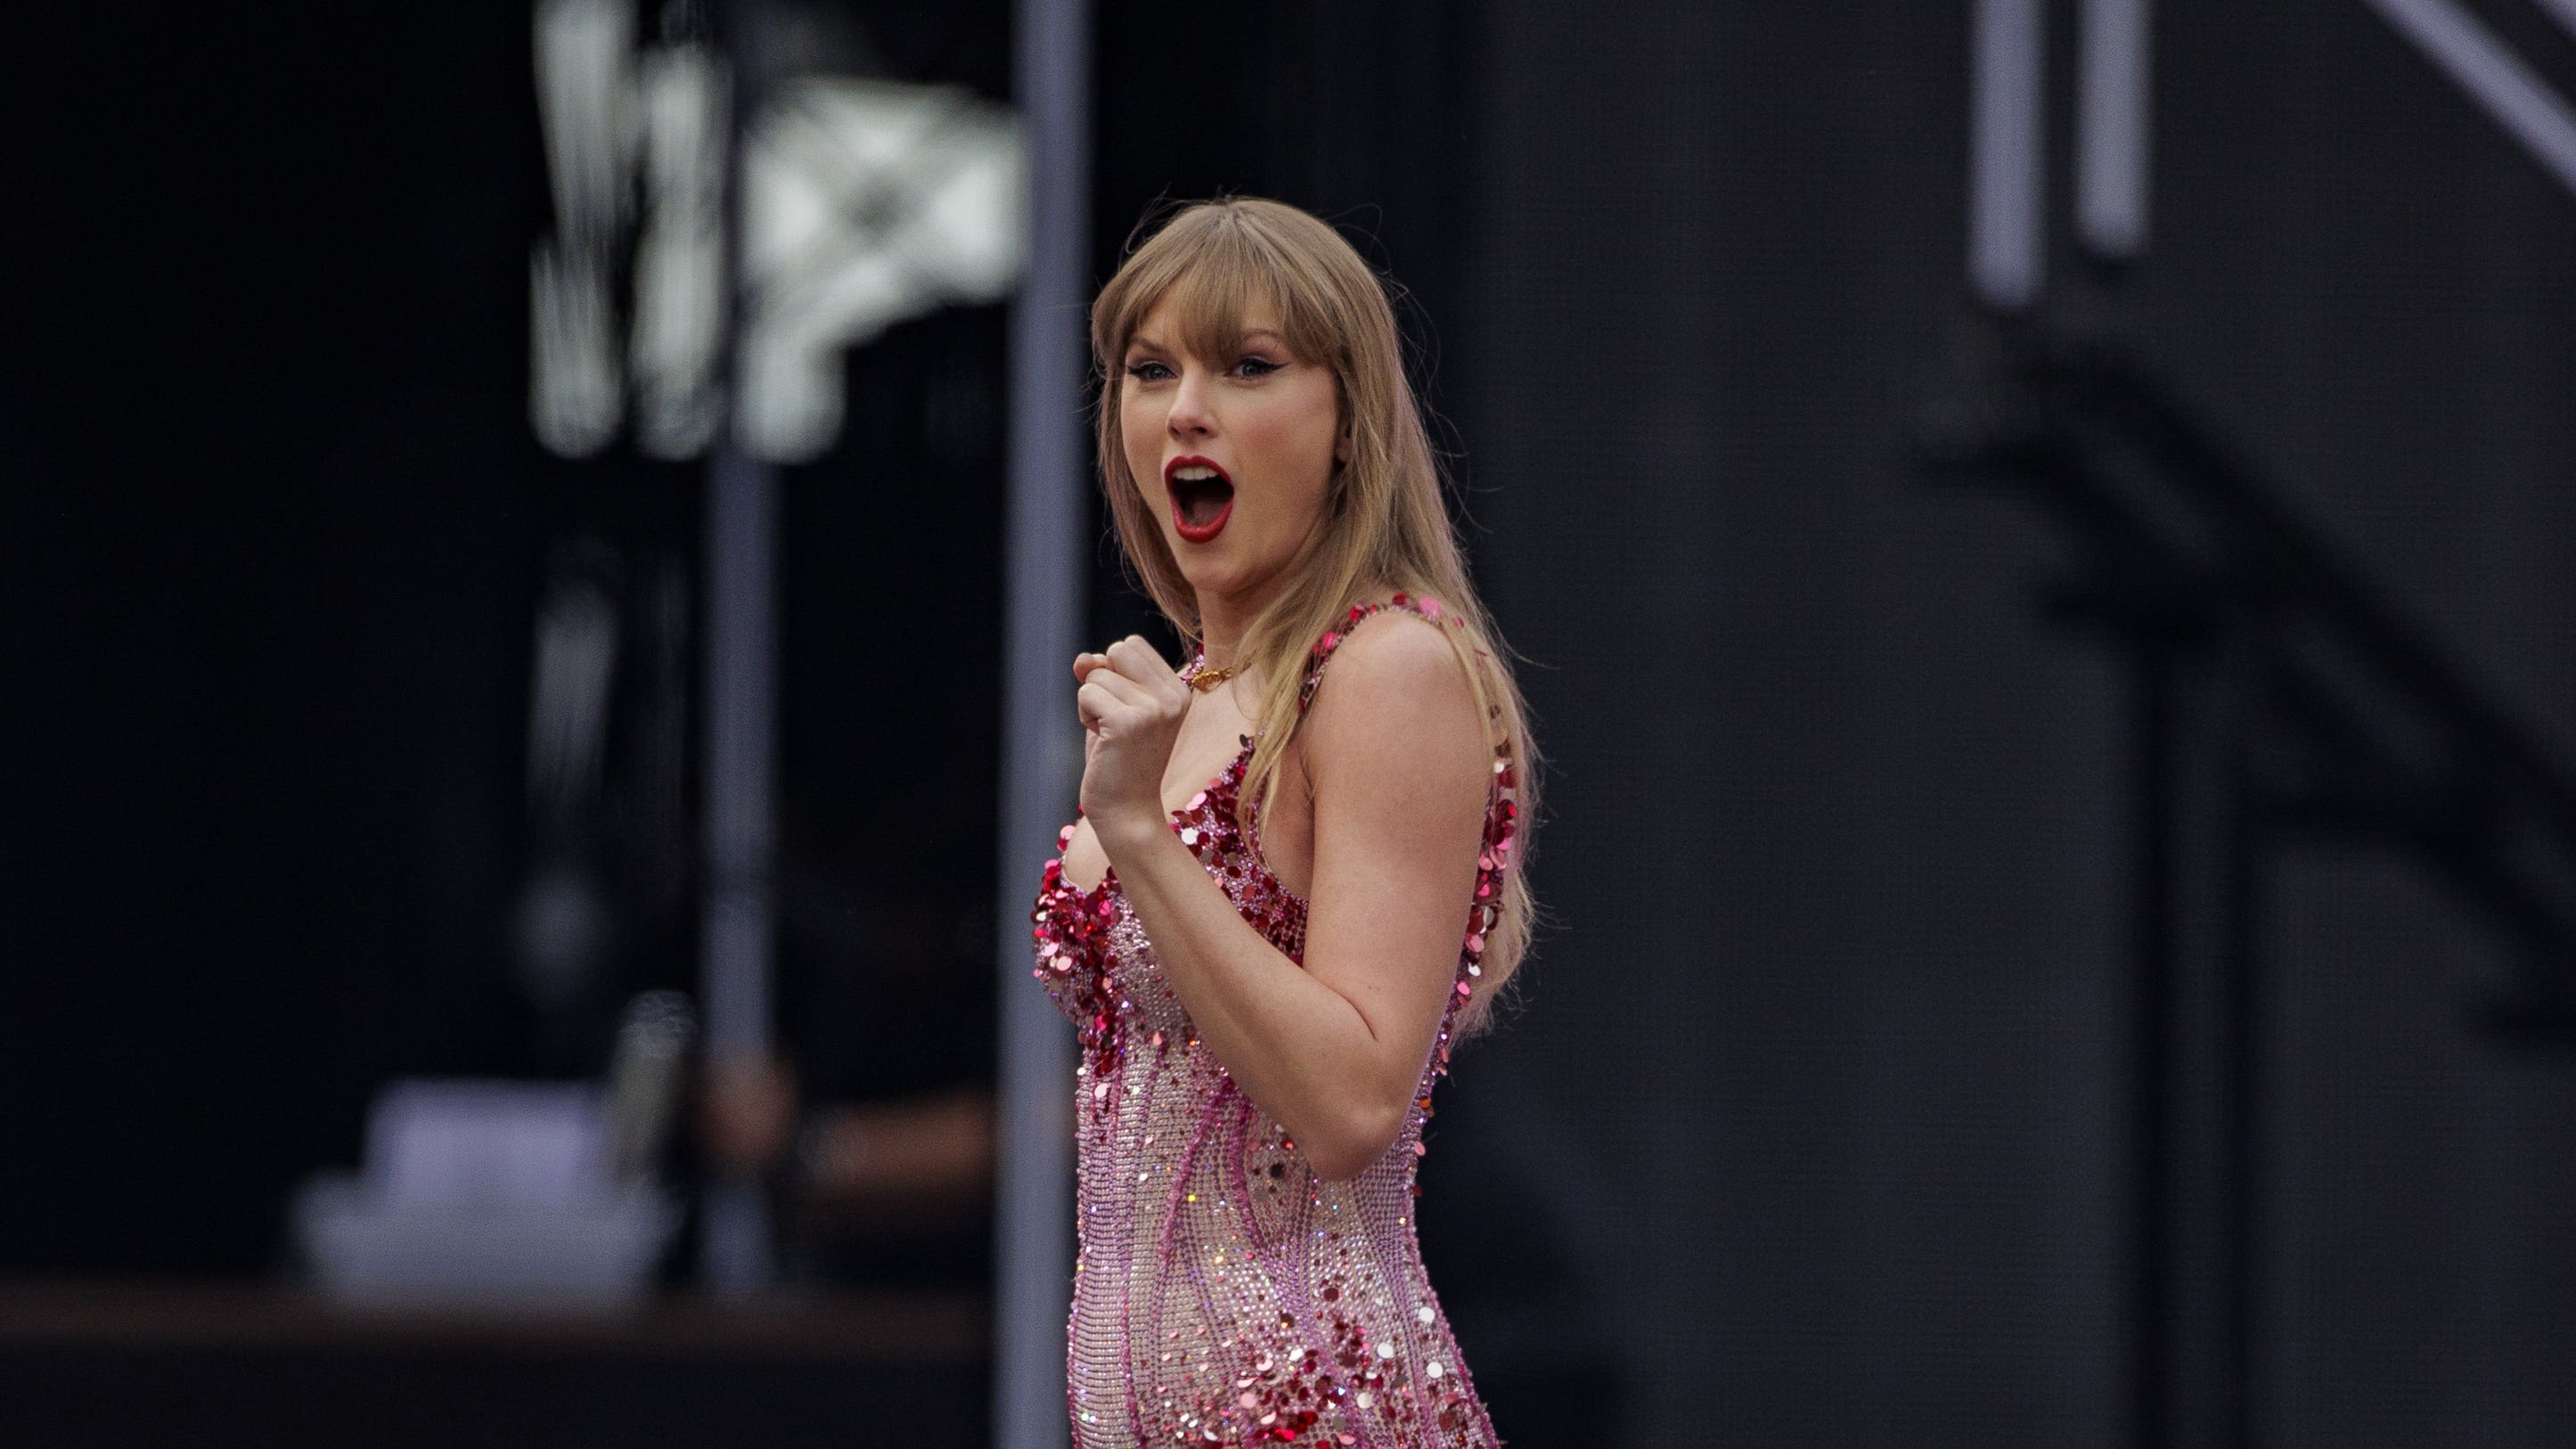 Why has inflation stayed the same and what is the ‘Taylor Swift effect’?